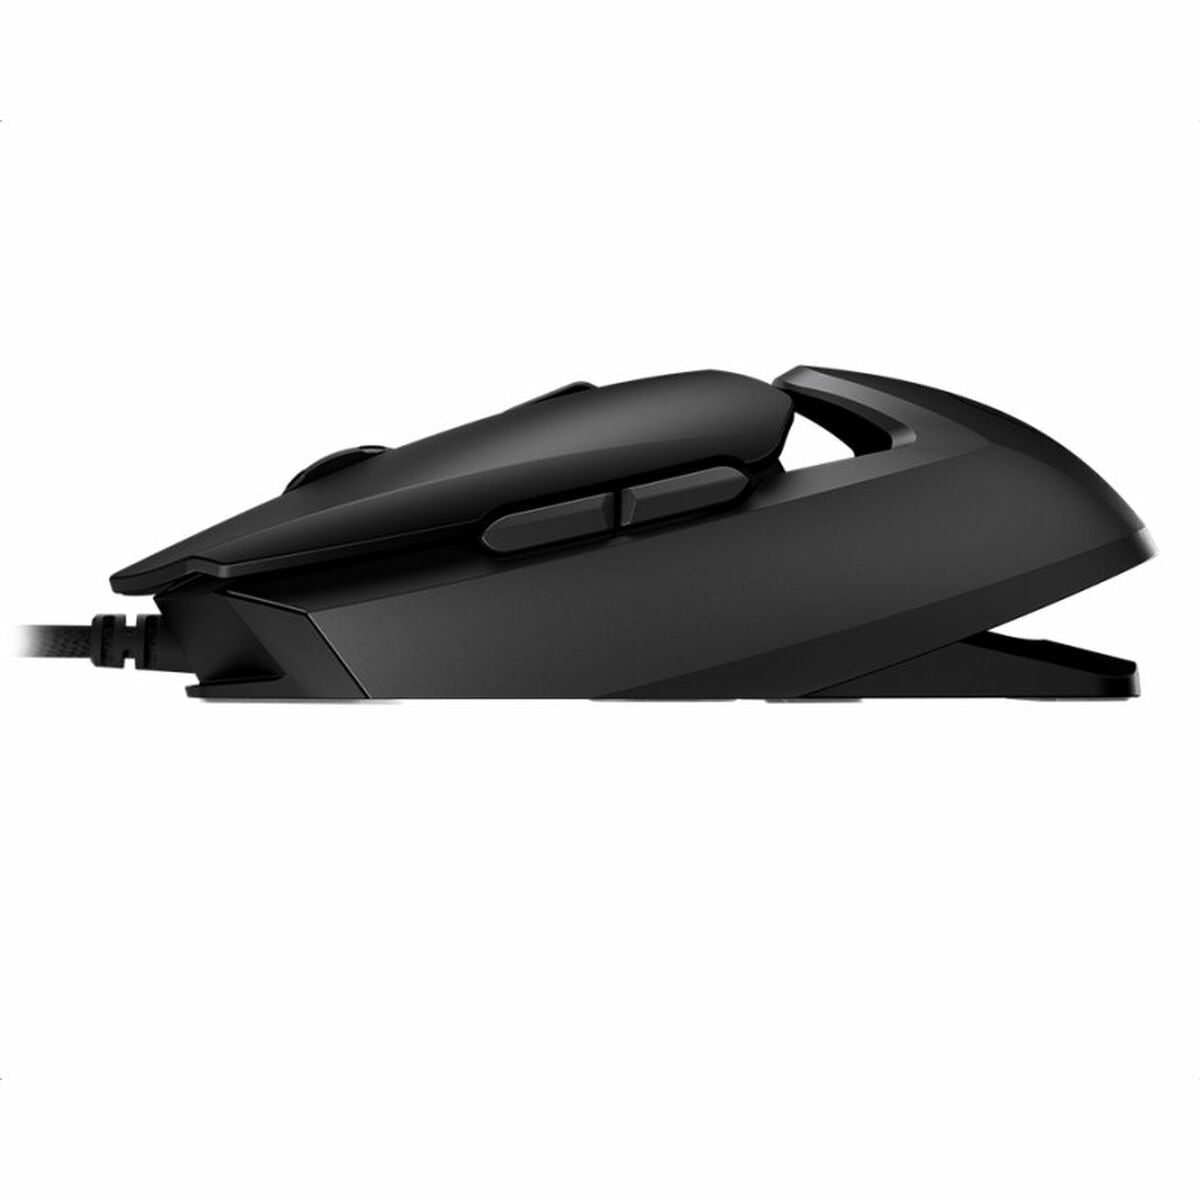 Mouse Cougar AIRBLADER 16000 dpi, Cougar, Computing, Accessories, mouse-cougar-airblader-16000-dpi, Brand_Cougar, category-reference-2609, category-reference-2642, category-reference-2656, category-reference-t-19685, category-reference-t-19908, category-reference-t-21353, computers / peripherals, Condition_NEW, office, Price_20 - 50, RiotNook